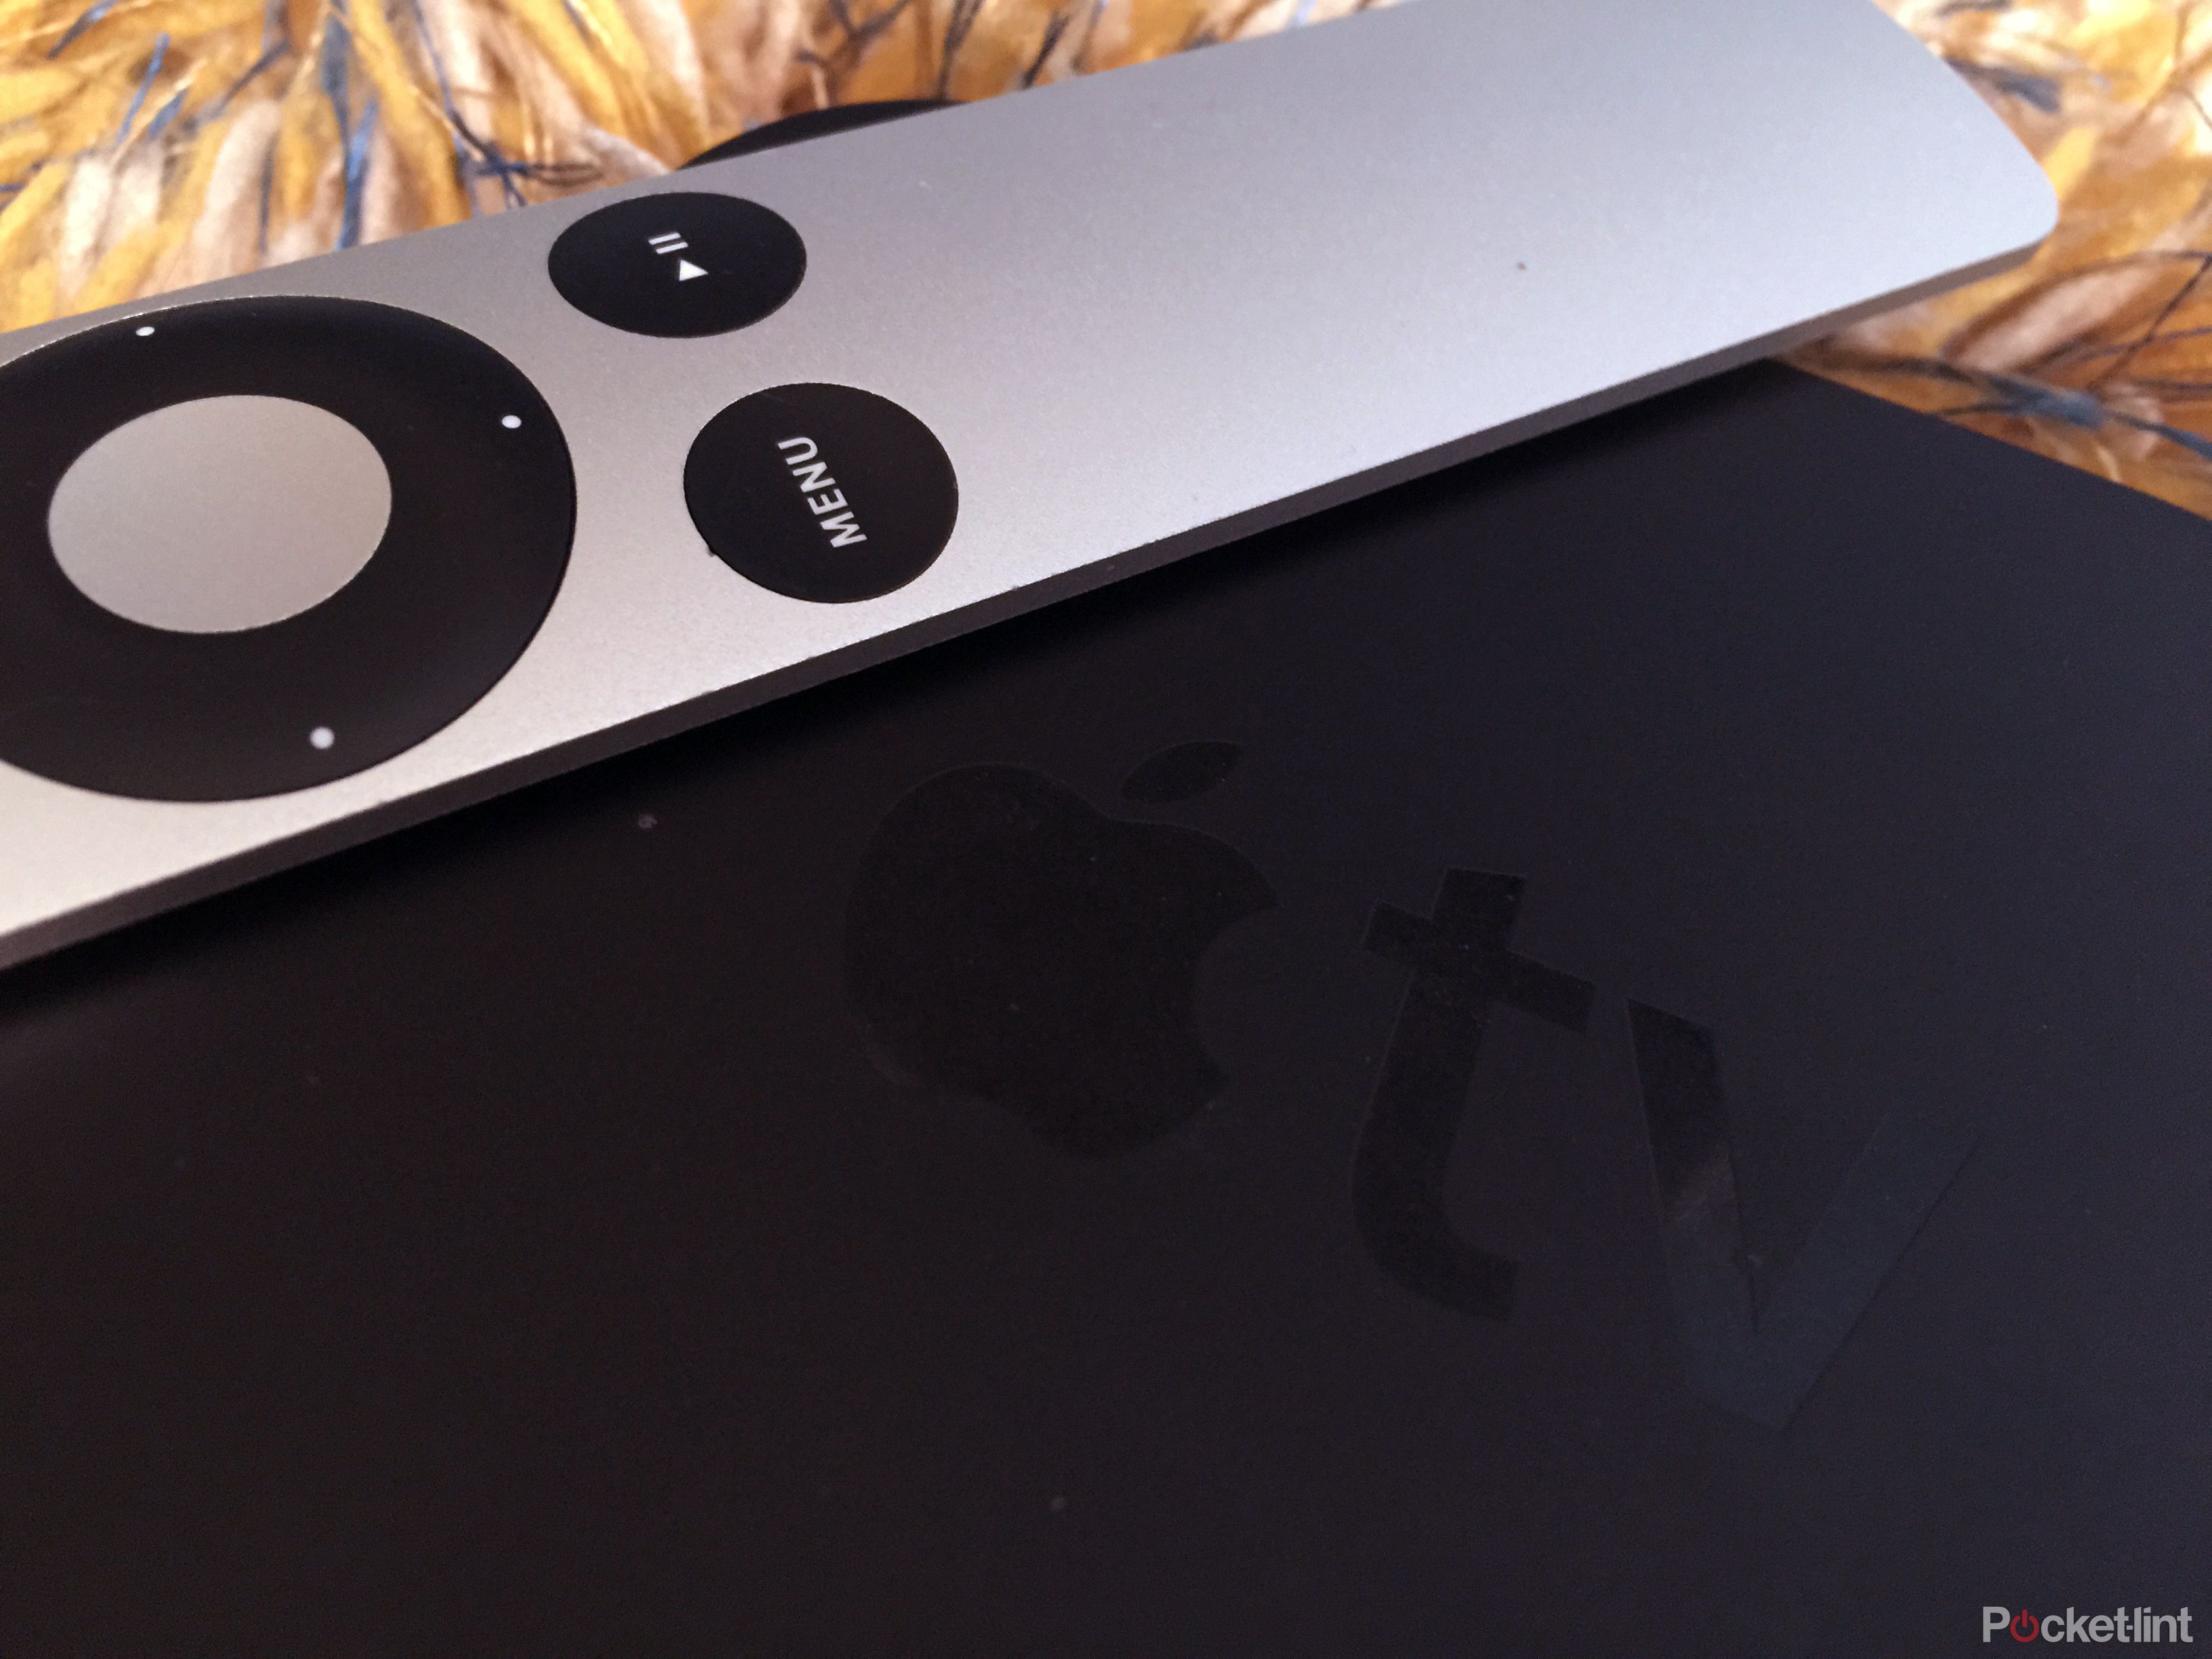 new apple tv details leaked universal voice search black touch remote no 4k 149 price image 1